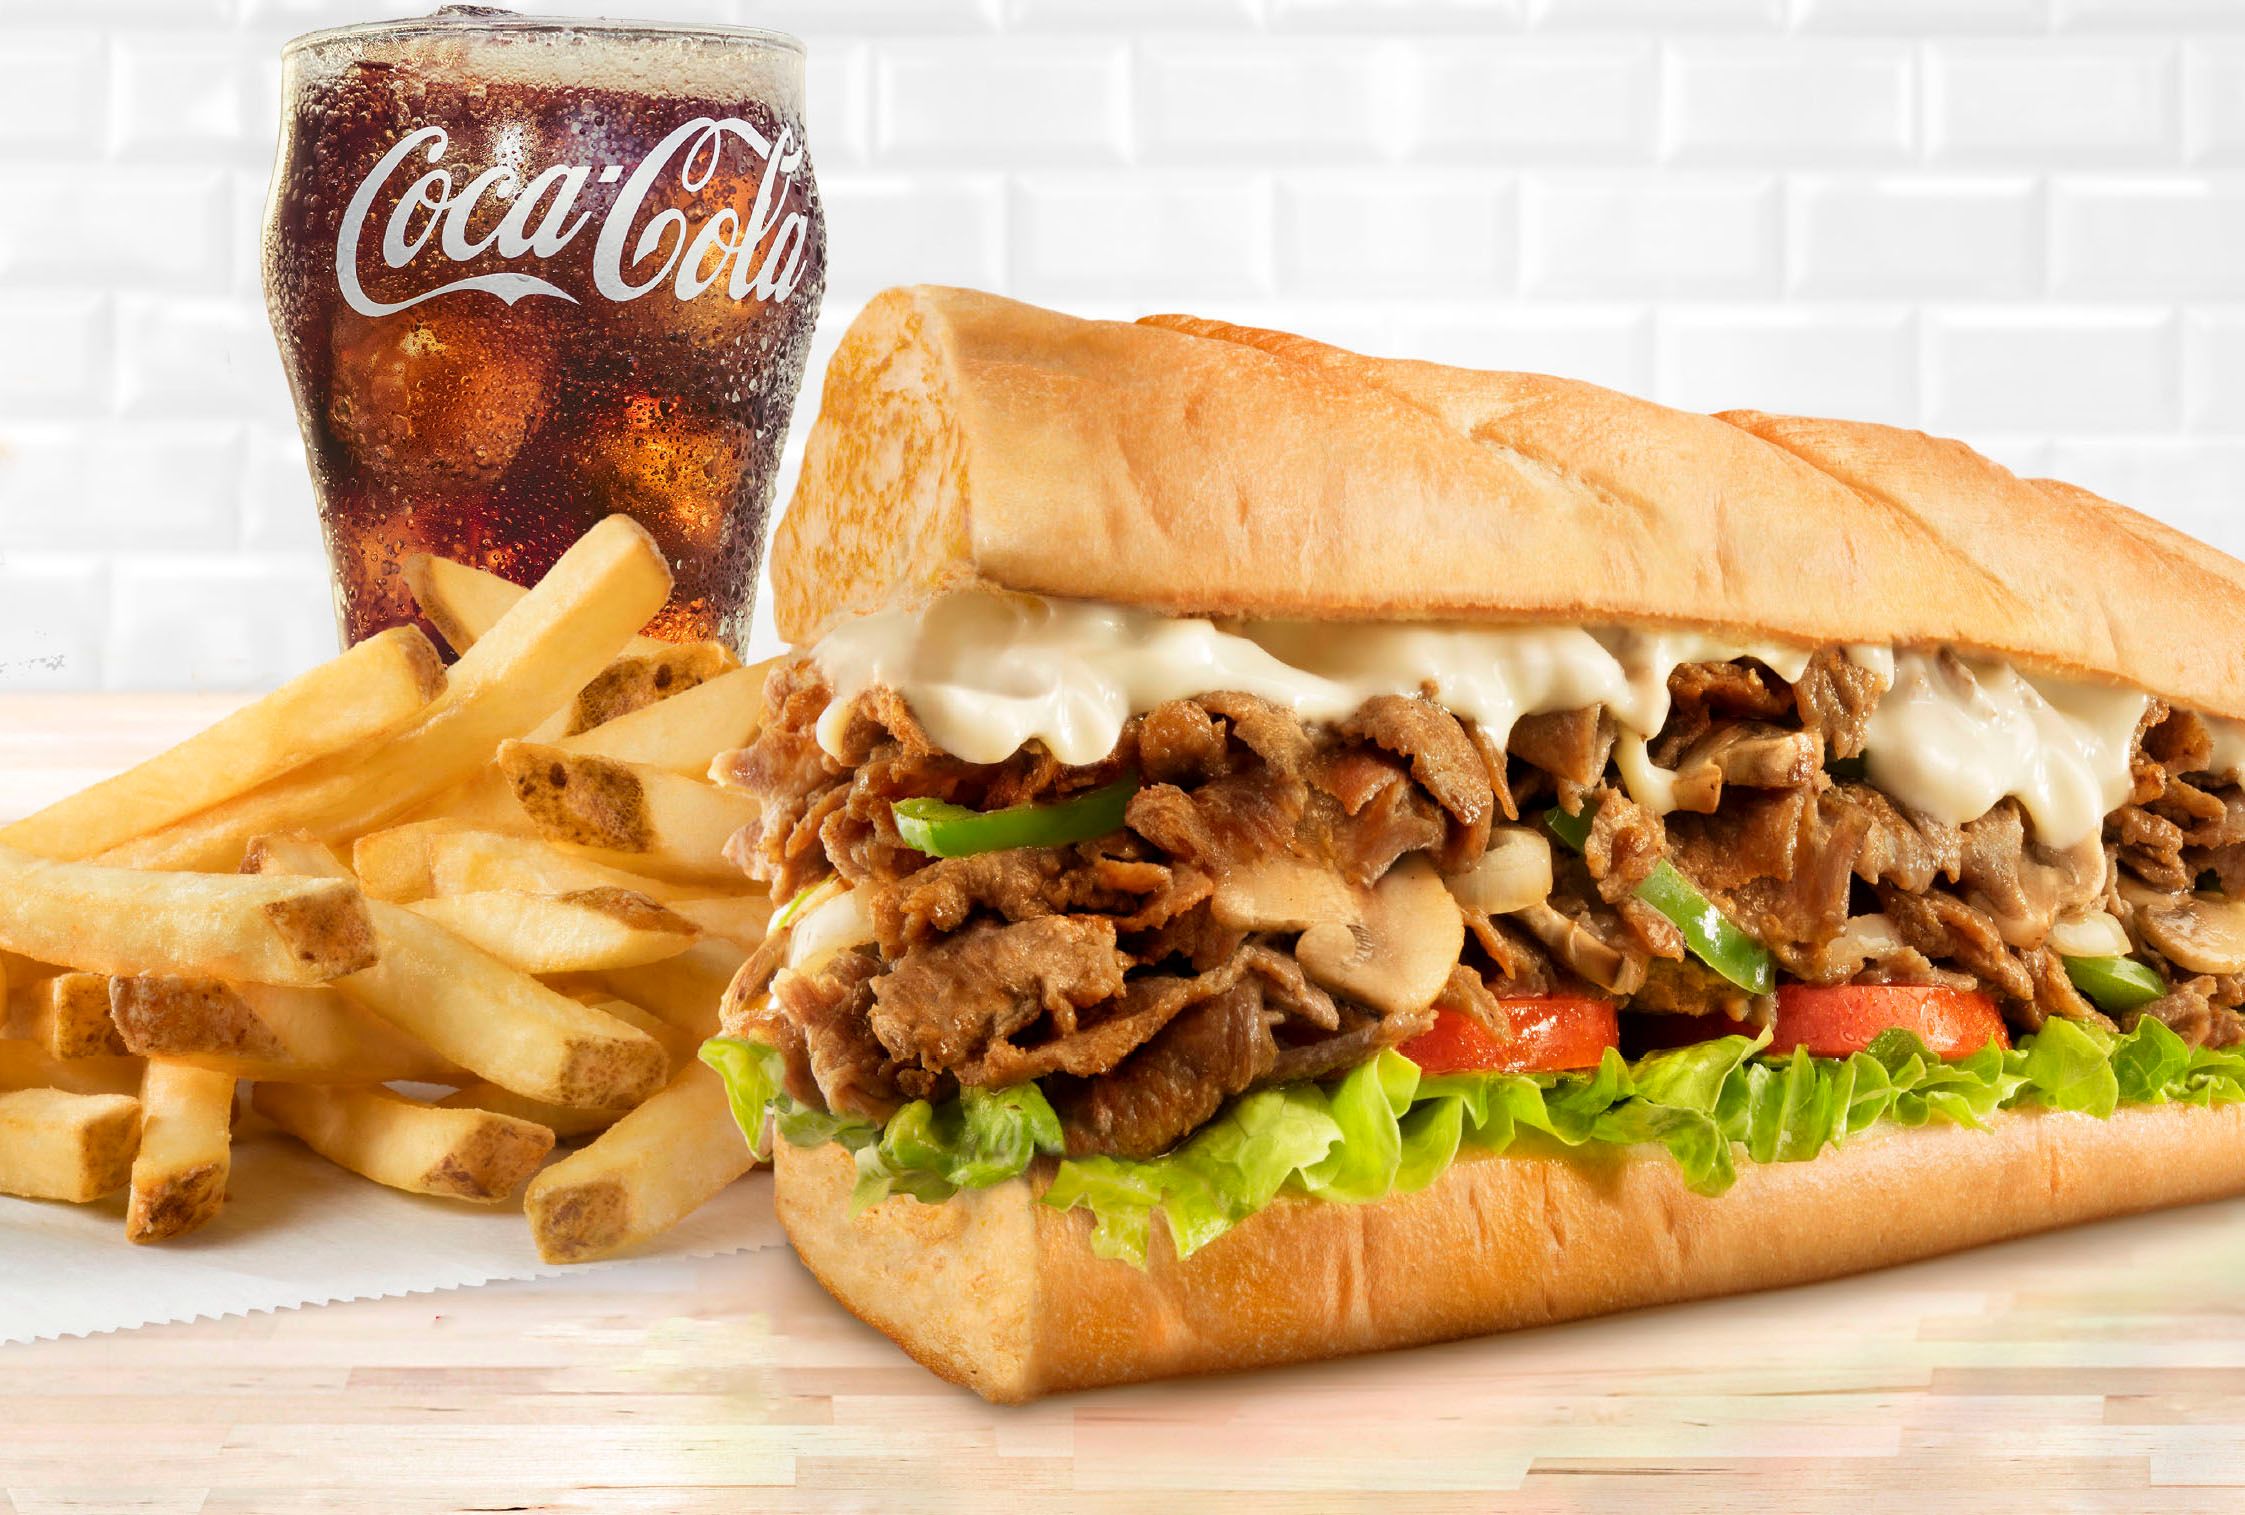 Through to March 1 Charleys Philly Steaks is Offering their Small Philly Steak Combo at a Discounted Price